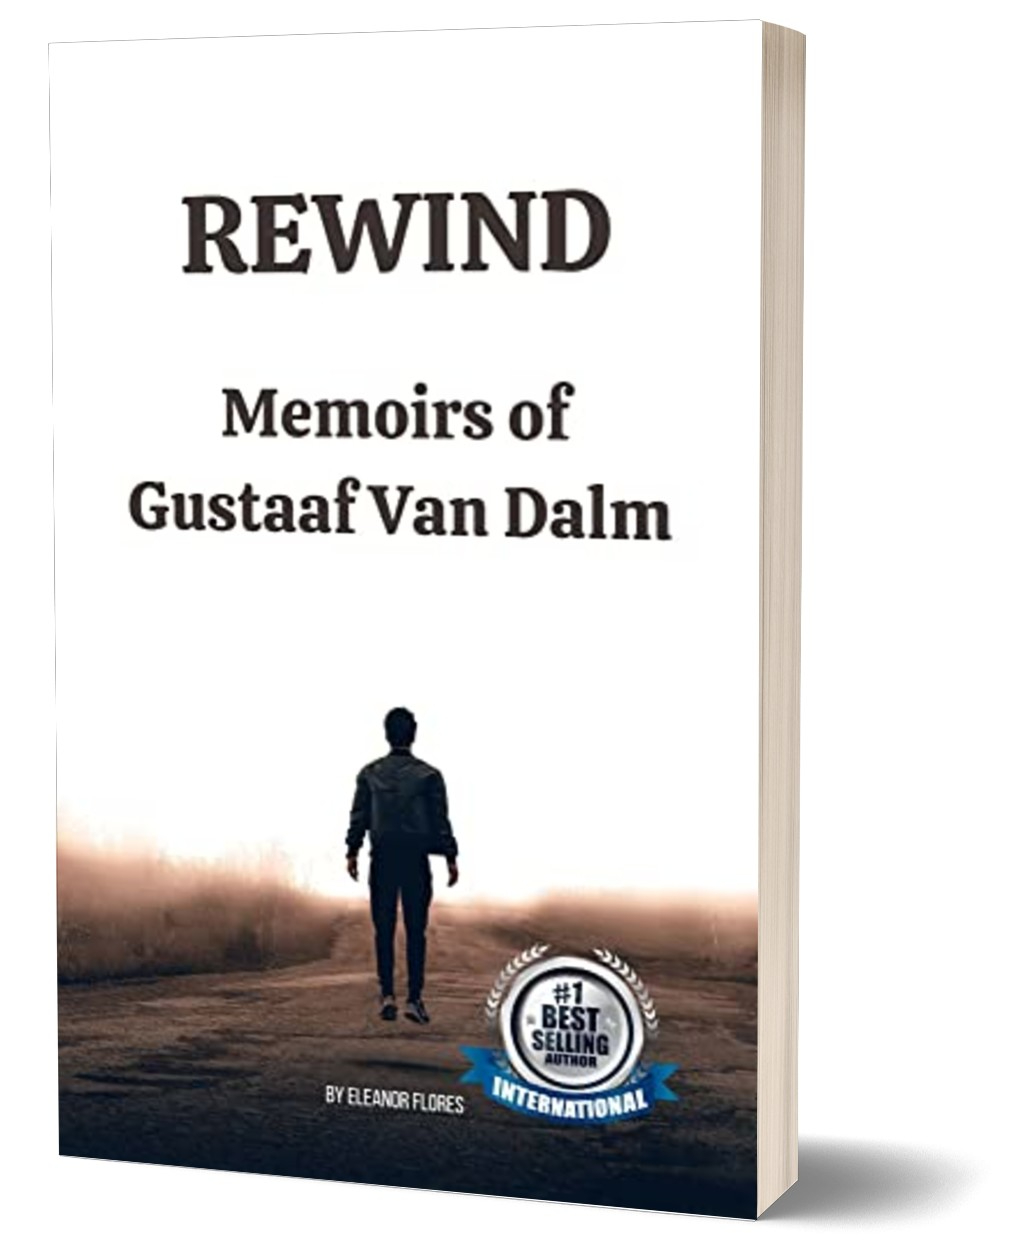 Rewind-Memoirs of Gustaaf Van Dalm, Eleanor Flores Author, life story